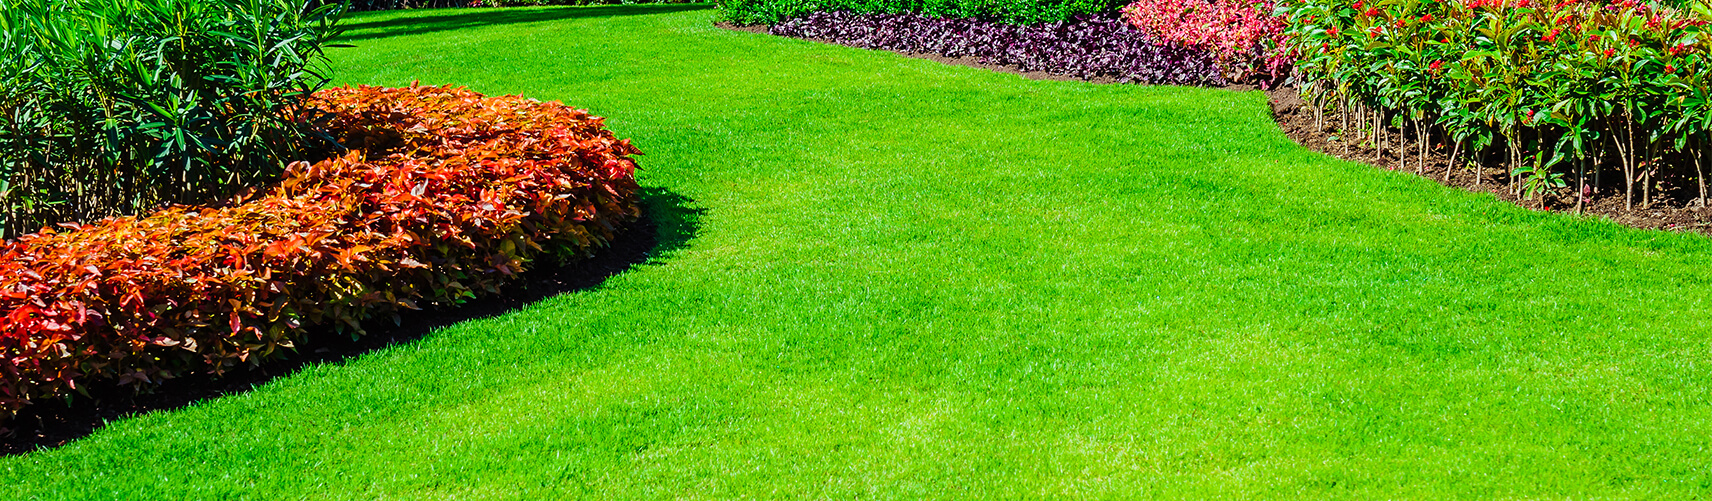 Jamestown Lawn Maintenance, Lawn Care Services and Lawn Mowing Service